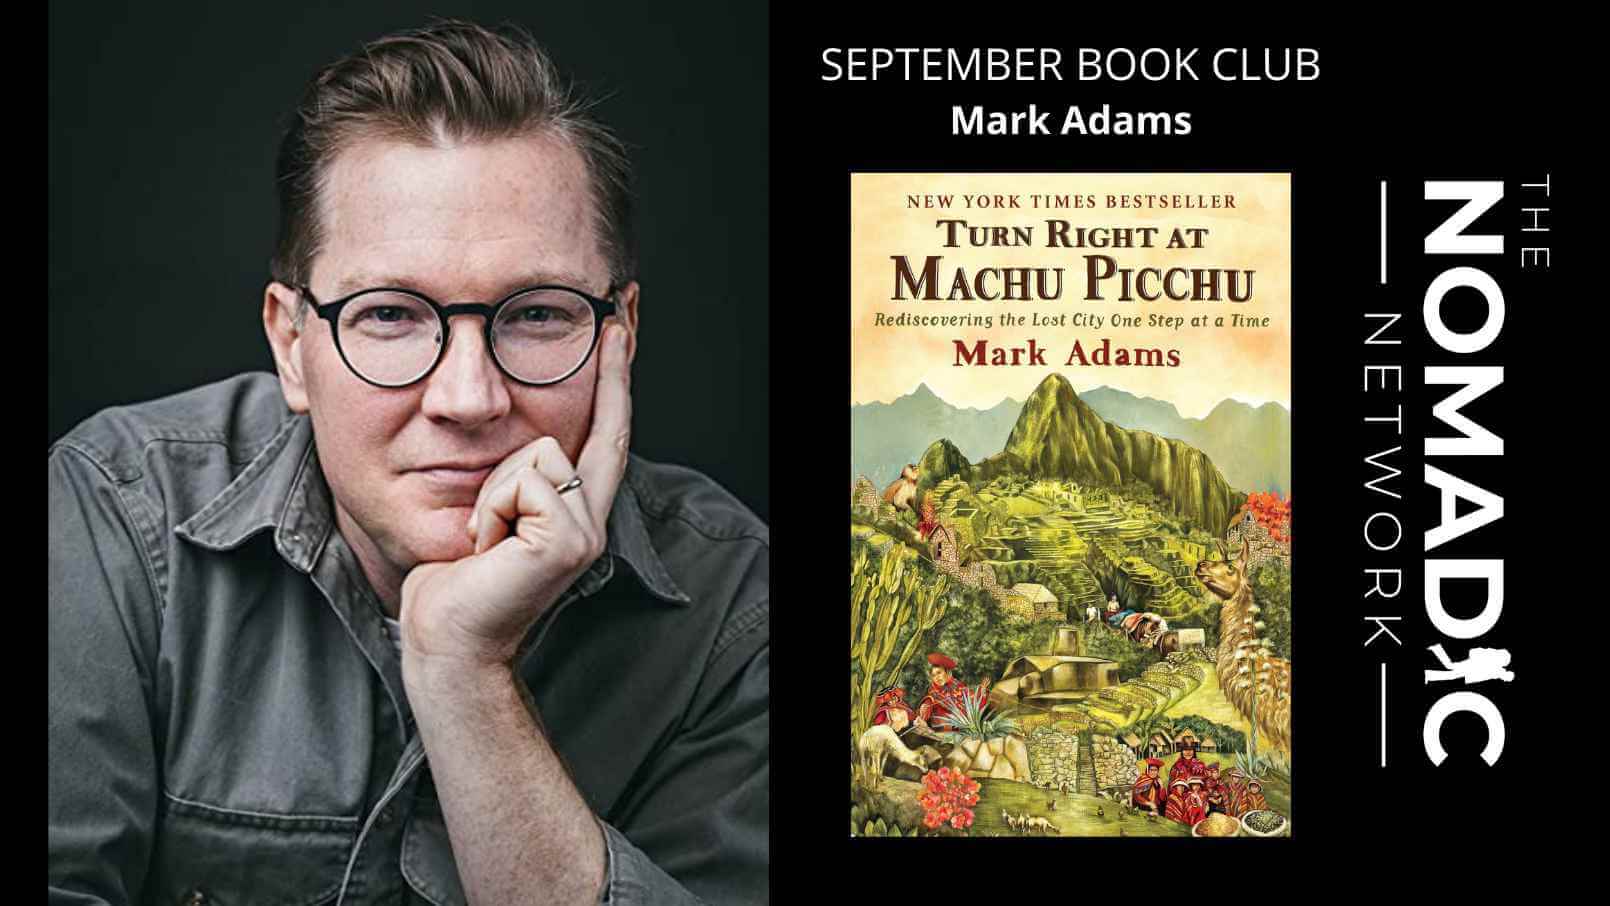 travel author mark adams and his famous travelogue turn right at Machu Picchu